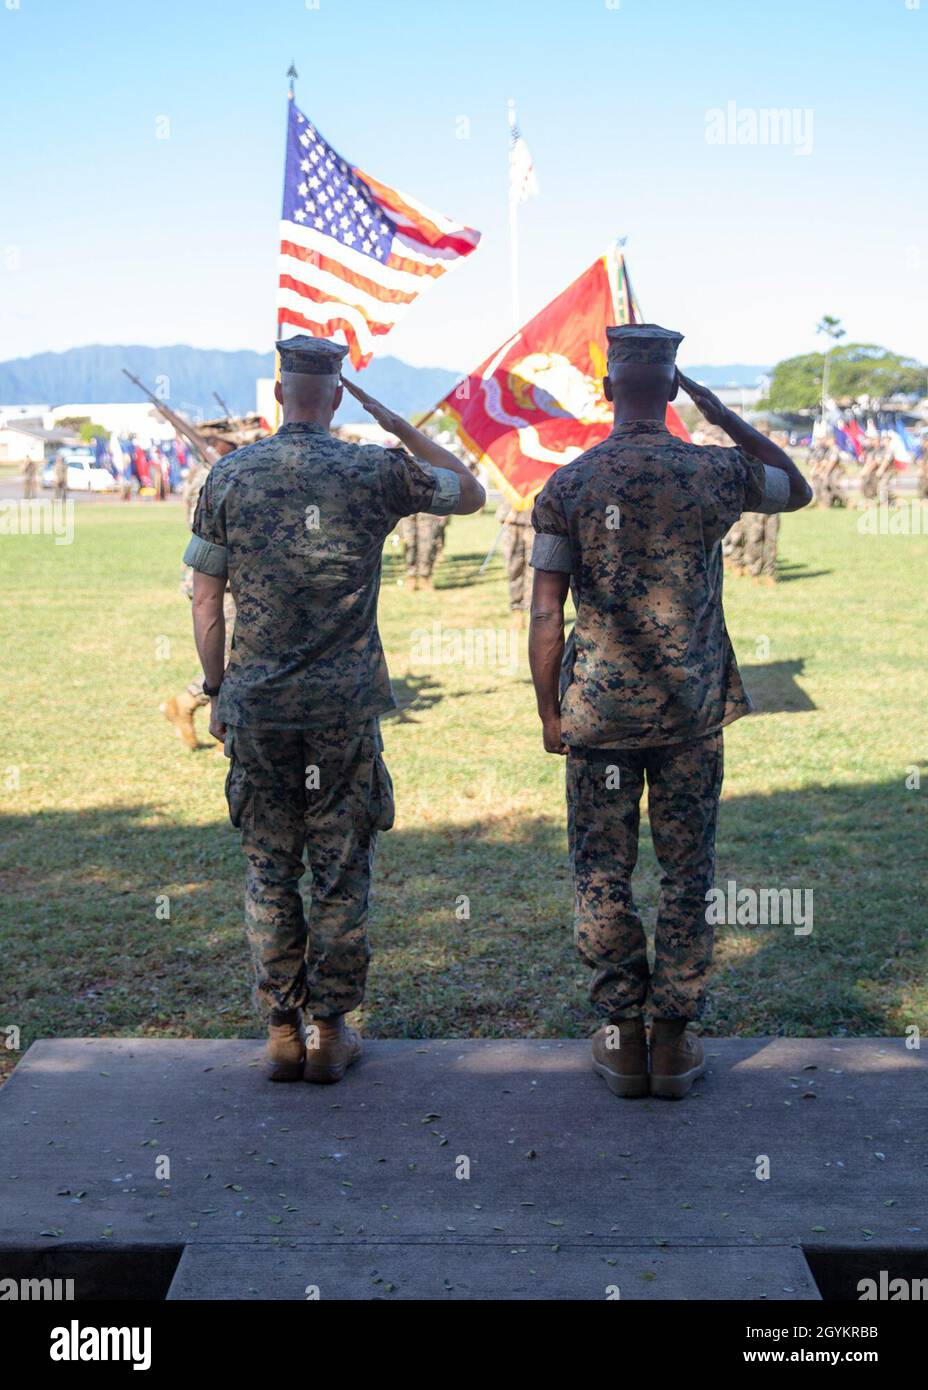 U.S. Marine Corps Lt. Col. James Reid, outgoing commanding officer, left, 3rd Battalion, 3rd Marine Regiment and Lt. Col. George Gordy, oncoming commanding officer salute the colors during a pass in review at their change of command ceremony on Marine Corps Base Hawaii, Jan, 23. 2020. Lt. Col James Reid relinquished command to Lt. Col. George Gordy IV. (U.S. Marine Corps photo by Cpl. Eric Tso) Stock Photo